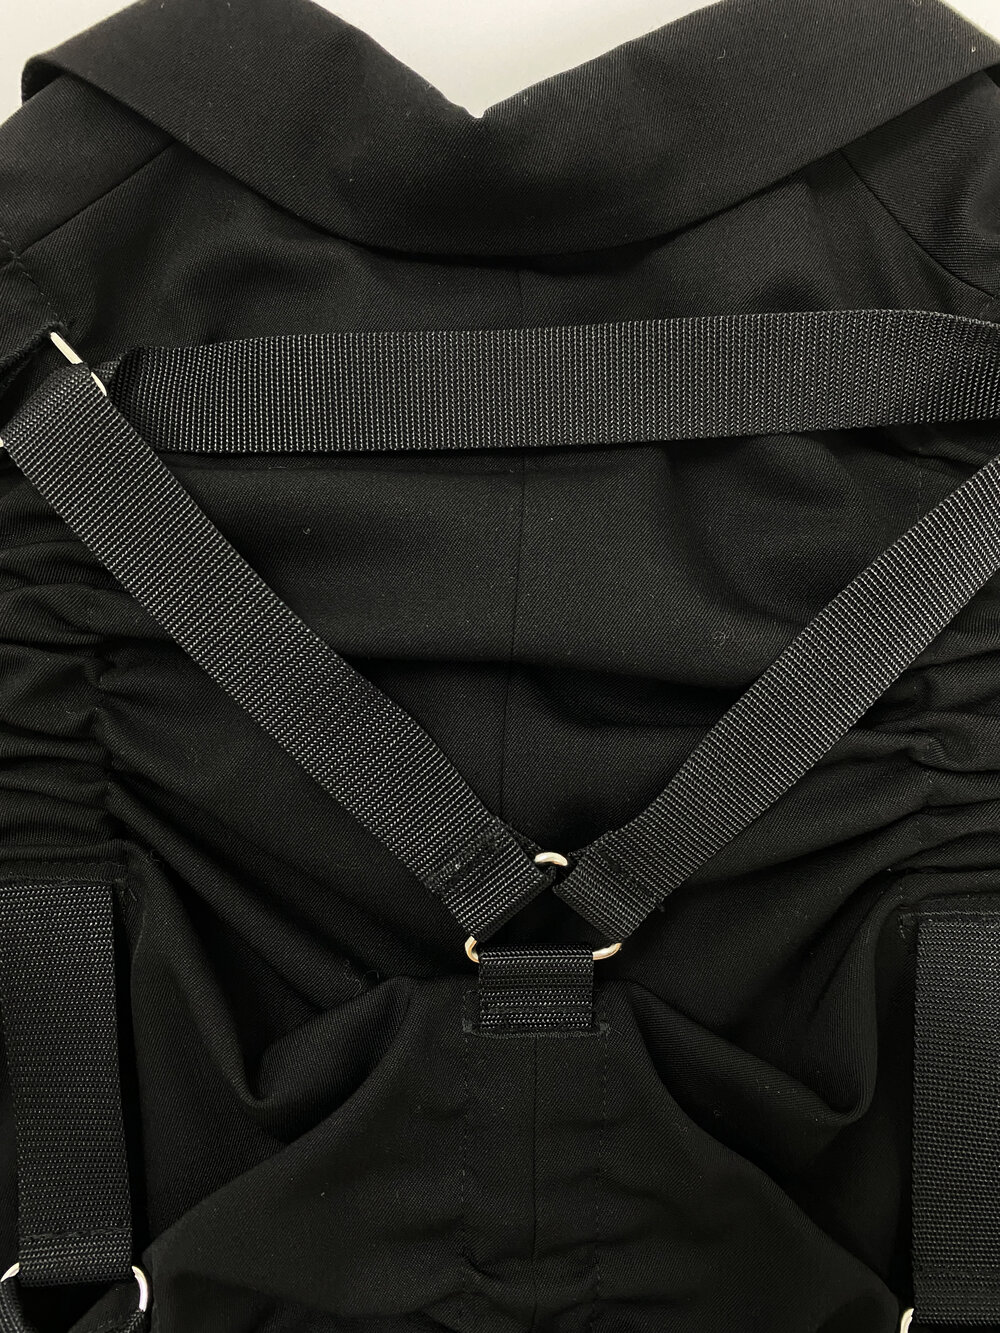 Junya Watanabe black parachute jacket with harness straps and open back —  spring 2003 - V A N II T A S